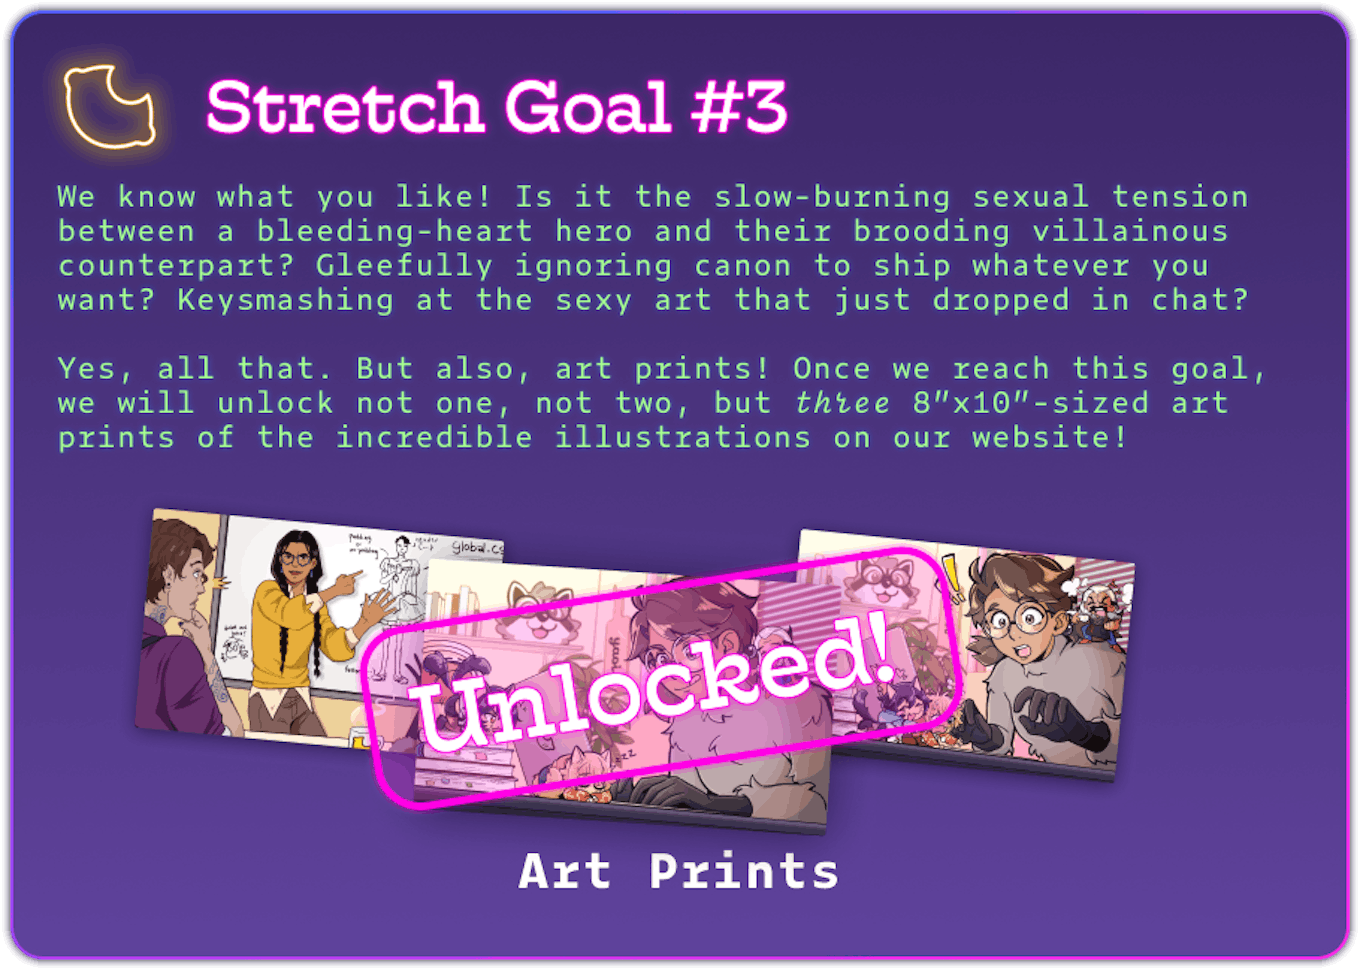 Stretch Goal #3 We know what you like! Is it the slow-burning sexual tension between a bleeding-heart hero and their brooding villainous counterpart? Gleefully ignoring canon to ship whatever you want? Keysmashing at the sexy art that just dropped in chat?  Yes, all that. But also, art prints! Once we reach this goal, we will unlock not one, not two, but three 8”x10”-sized art prints of the incredible illustrations on our website! Unlocked! Art Prints